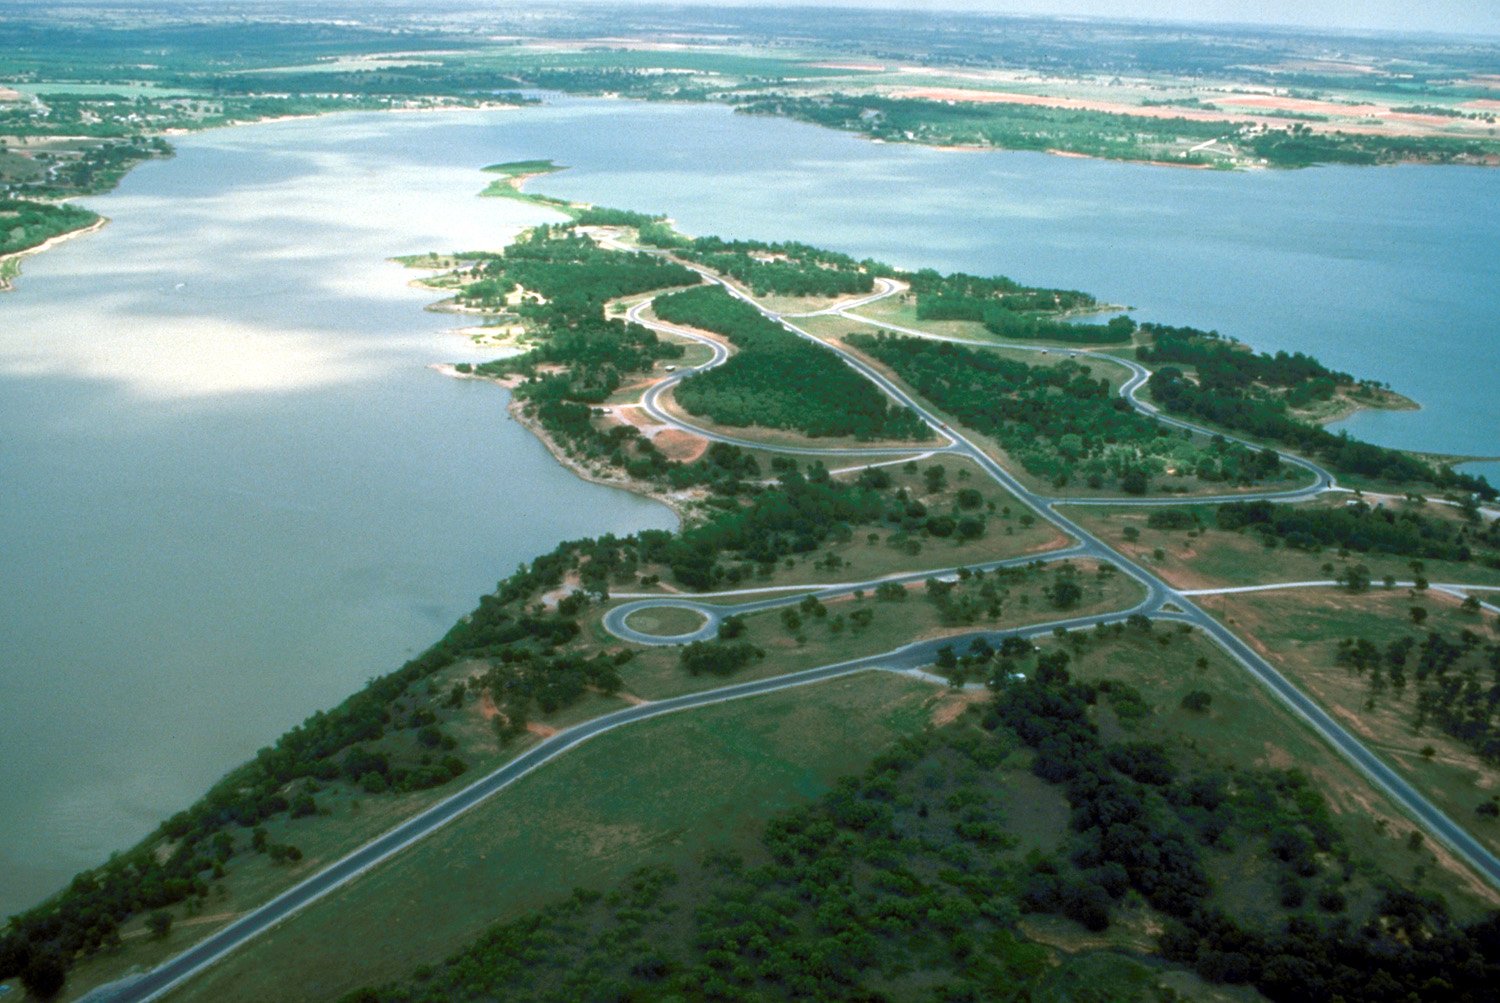 An aerial view of Proctor Lake